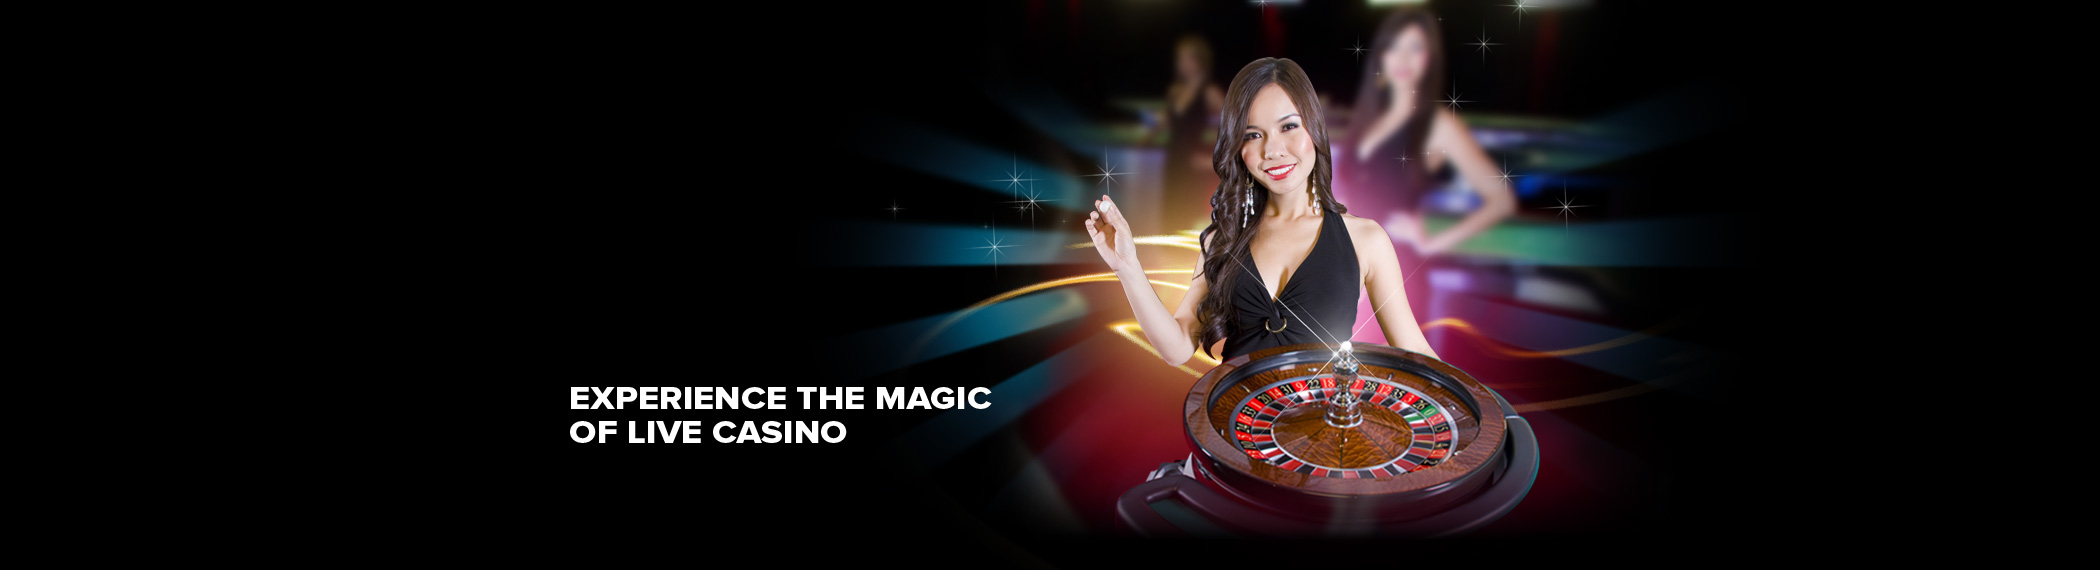 Live Mobile Roulette Perks and Bonuses £100  | Play Now!